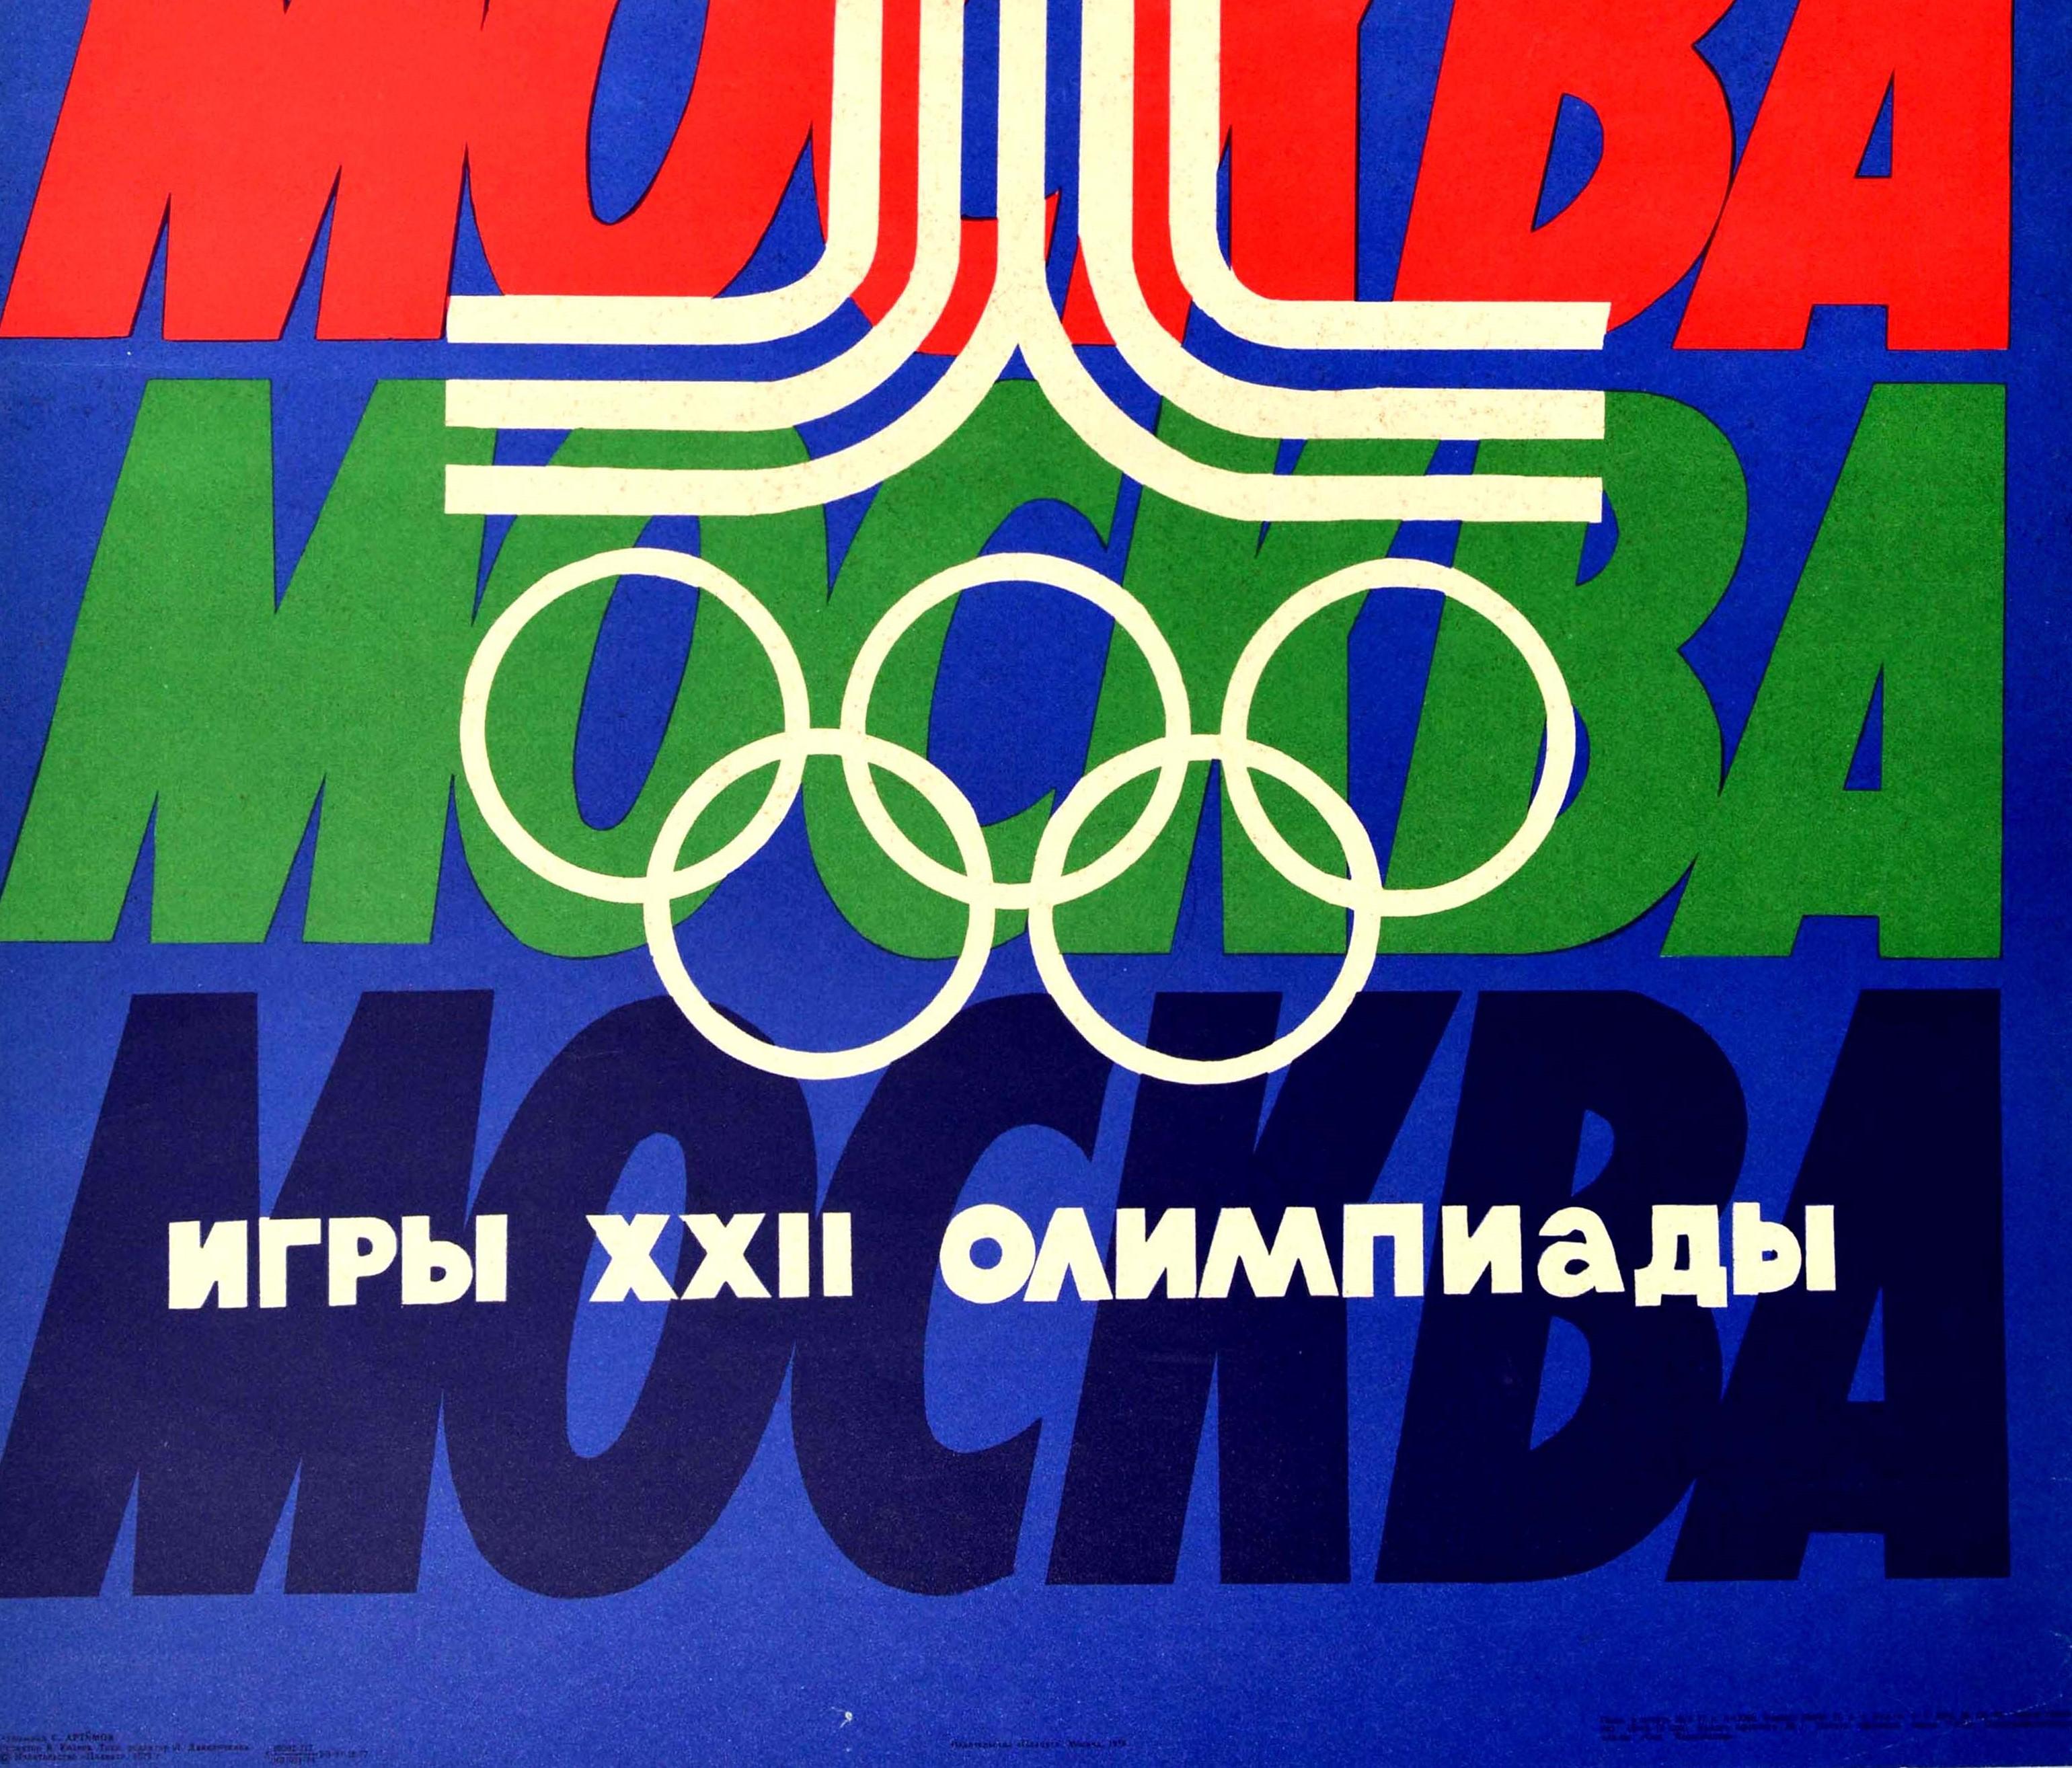 Original Vintage Sport Poster Summer Olympic Games 1980 Moscow Russia Москва - Blue Print by S. Artamov